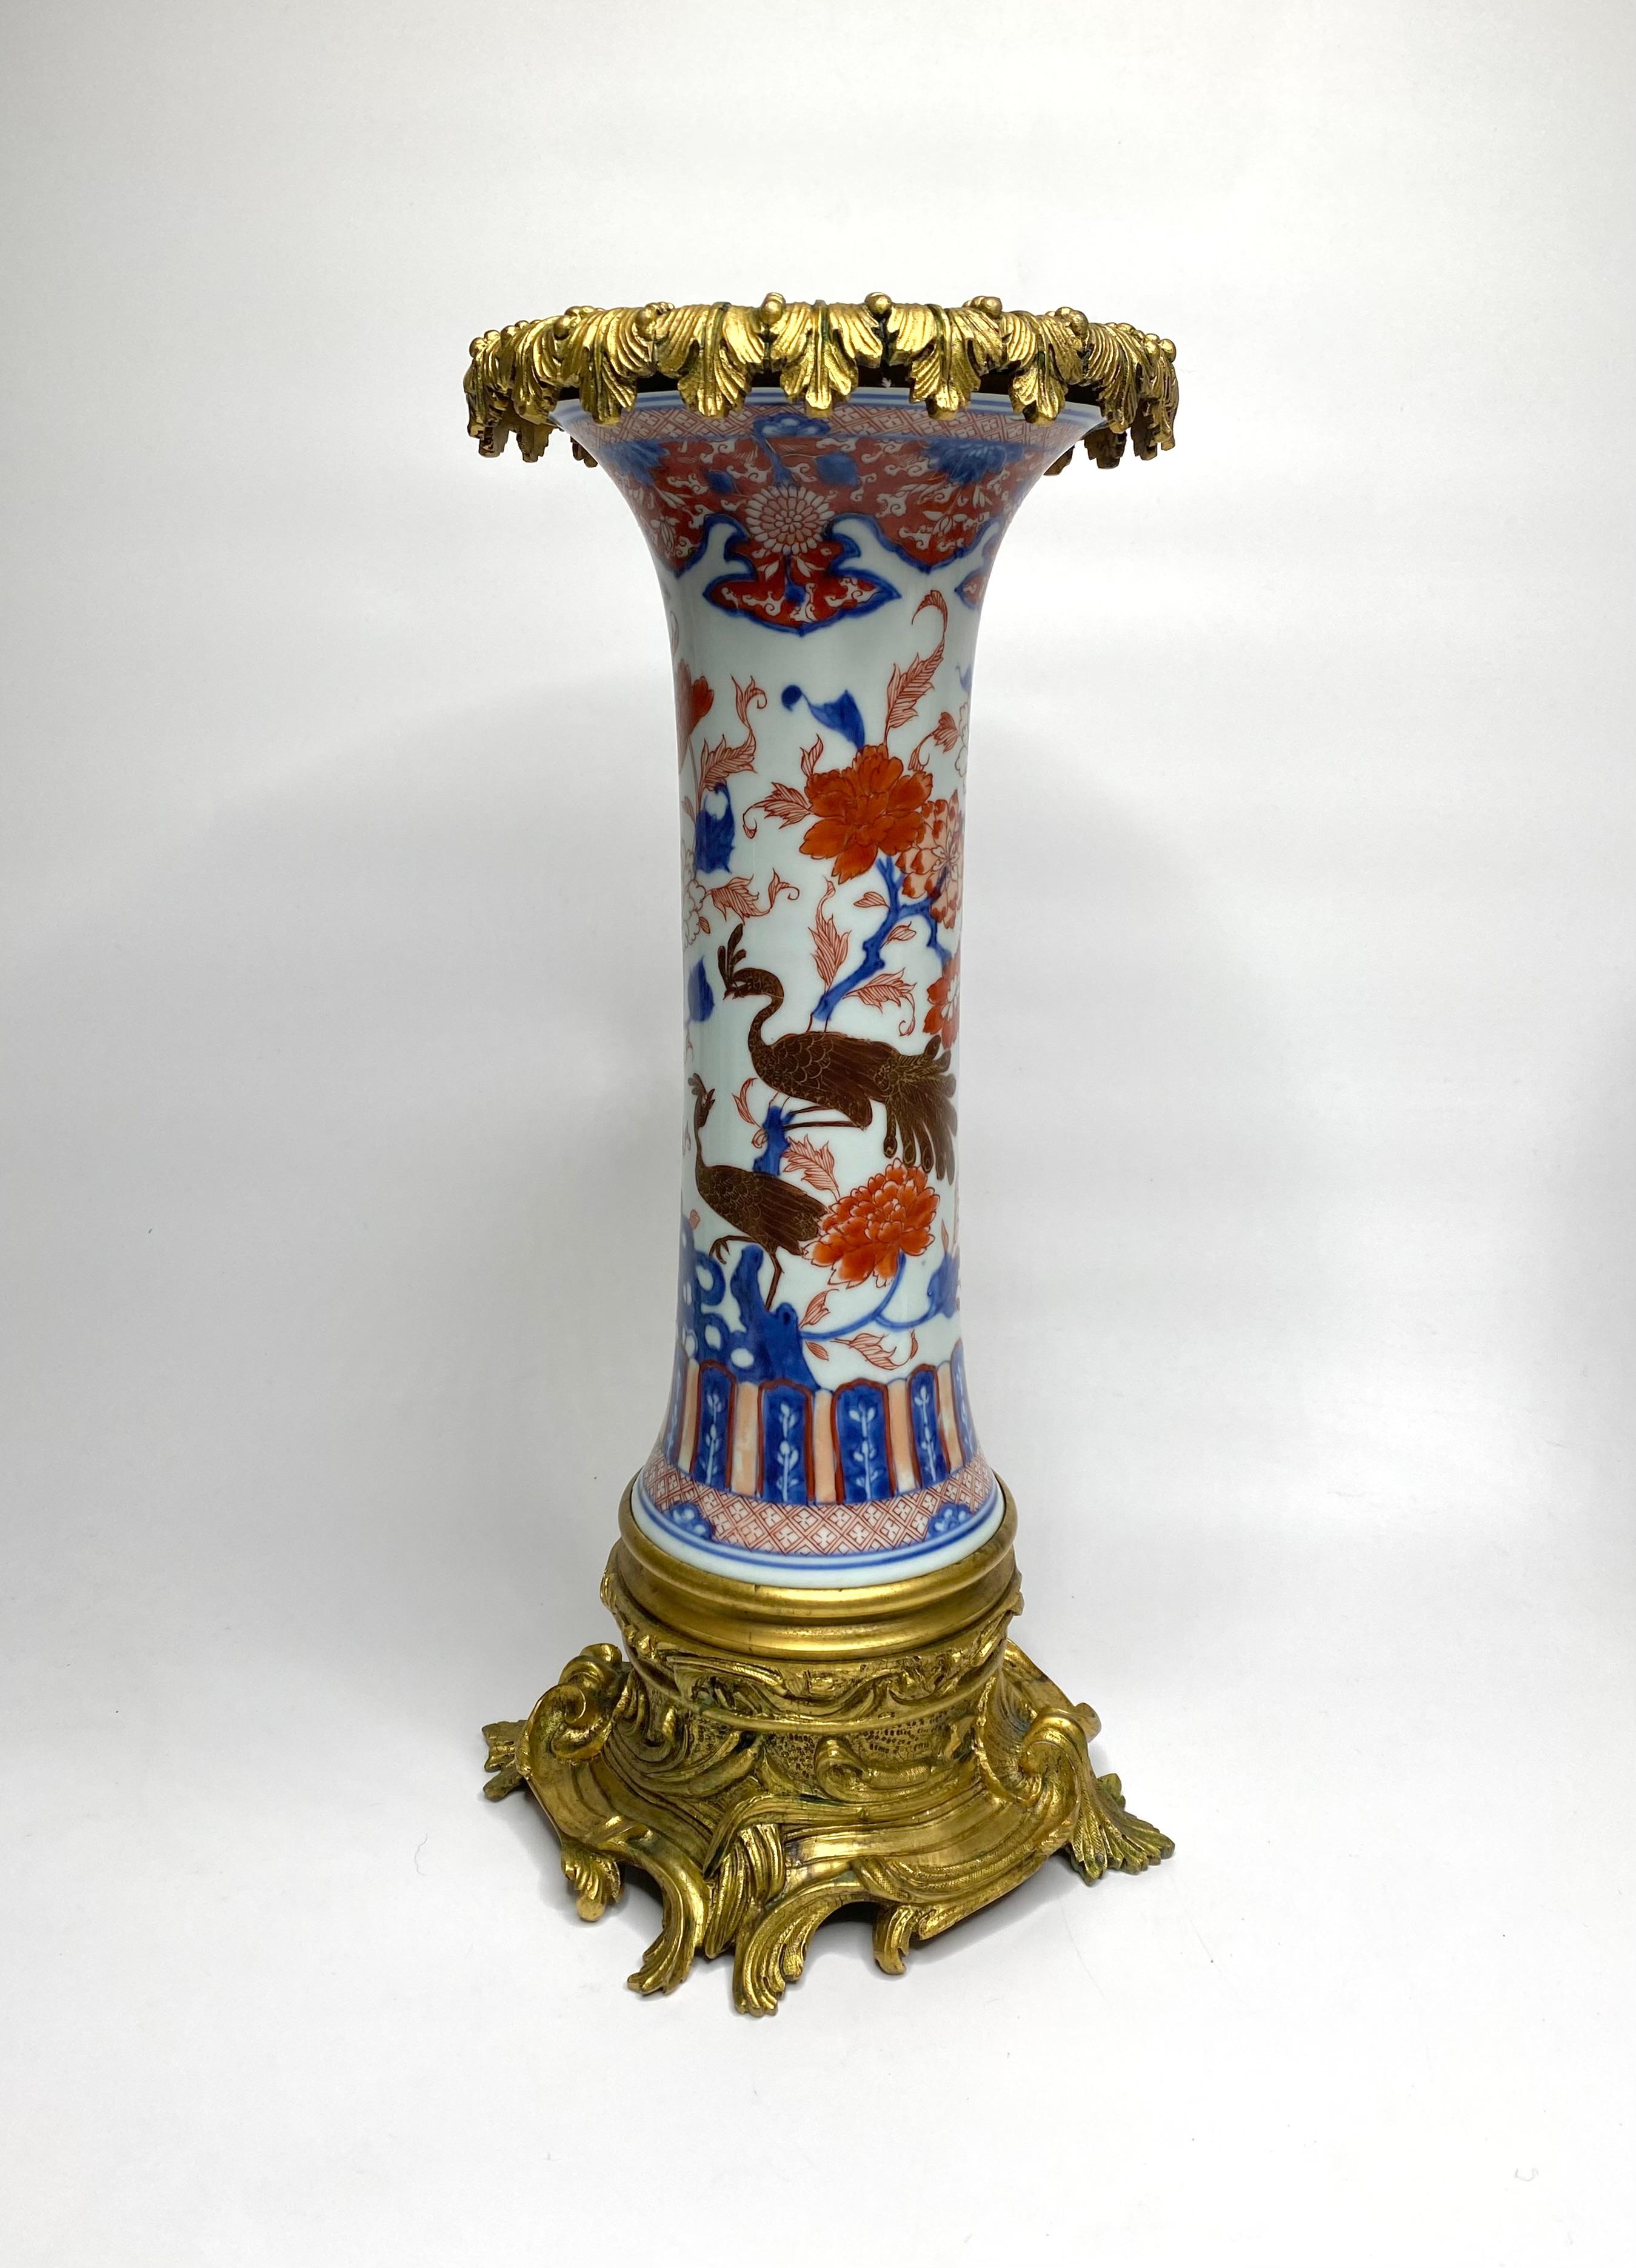 A fine pair of Chinese porcelain vases, c. 1700, Kangxi Period, ormolu mounted. The trumpet shaped vases, hand painted in Imari style, with exotic birds amongst flowering plants, above a continuous lappet and cell net motif. The upper rim painted